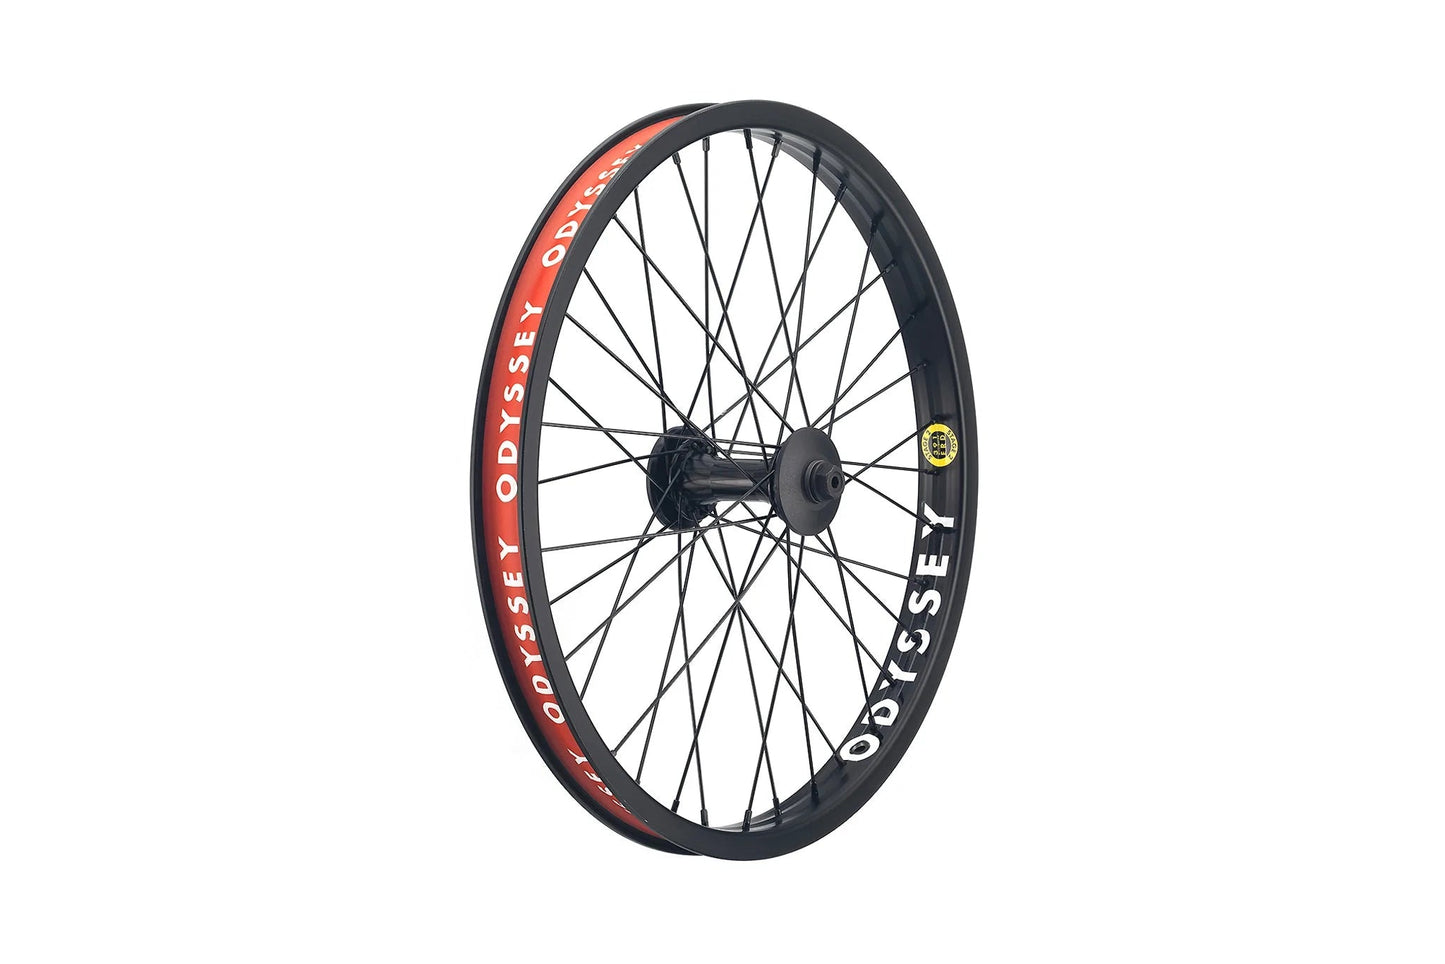 Odyssey Stage 2 Front Wheel